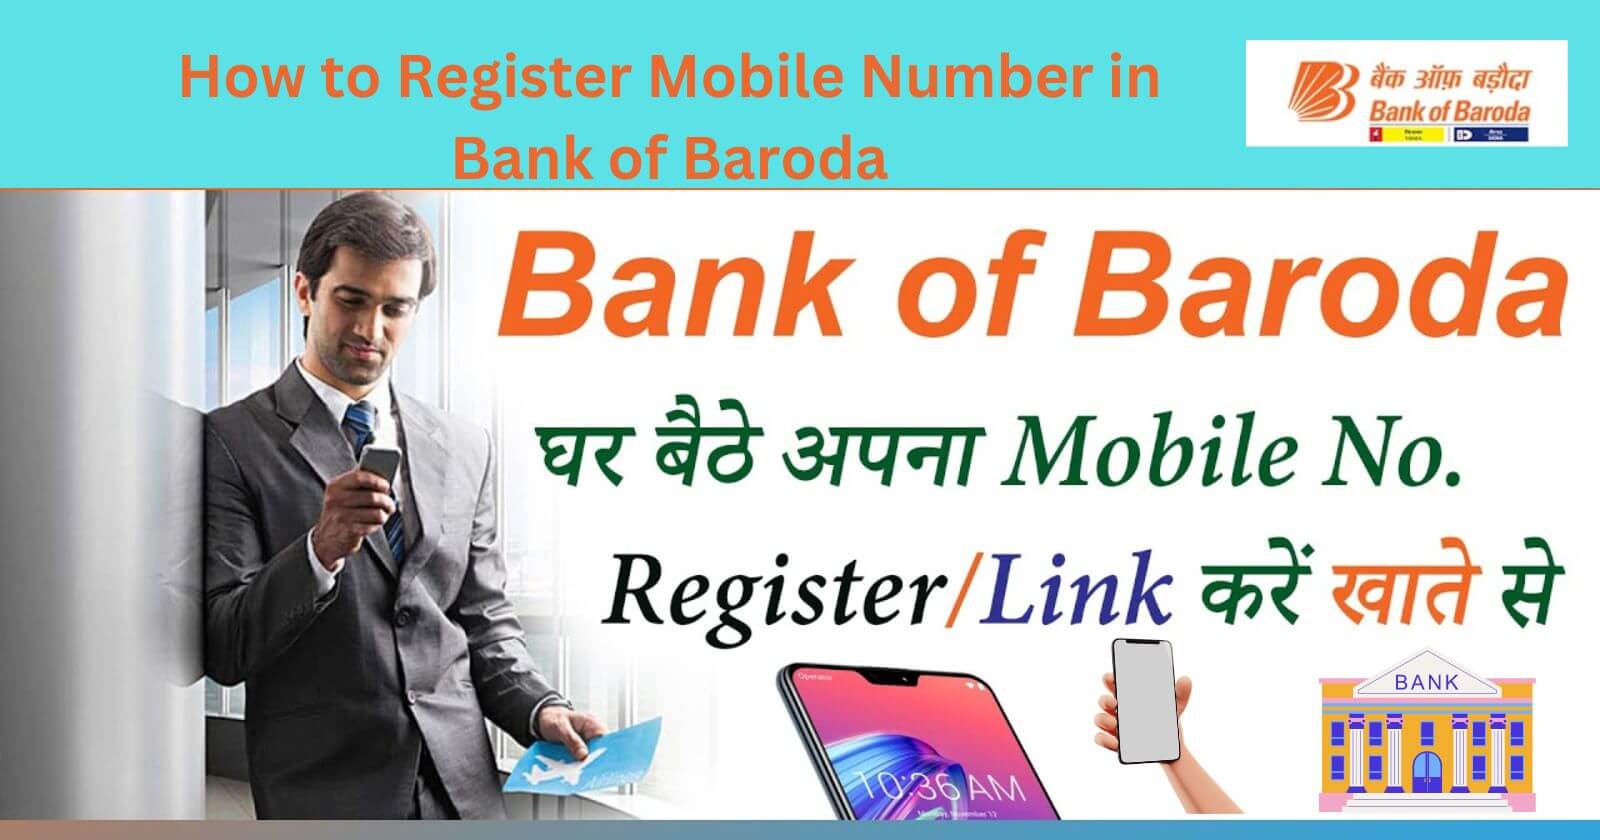 How to Register Mobile Number in Bank of Baroda